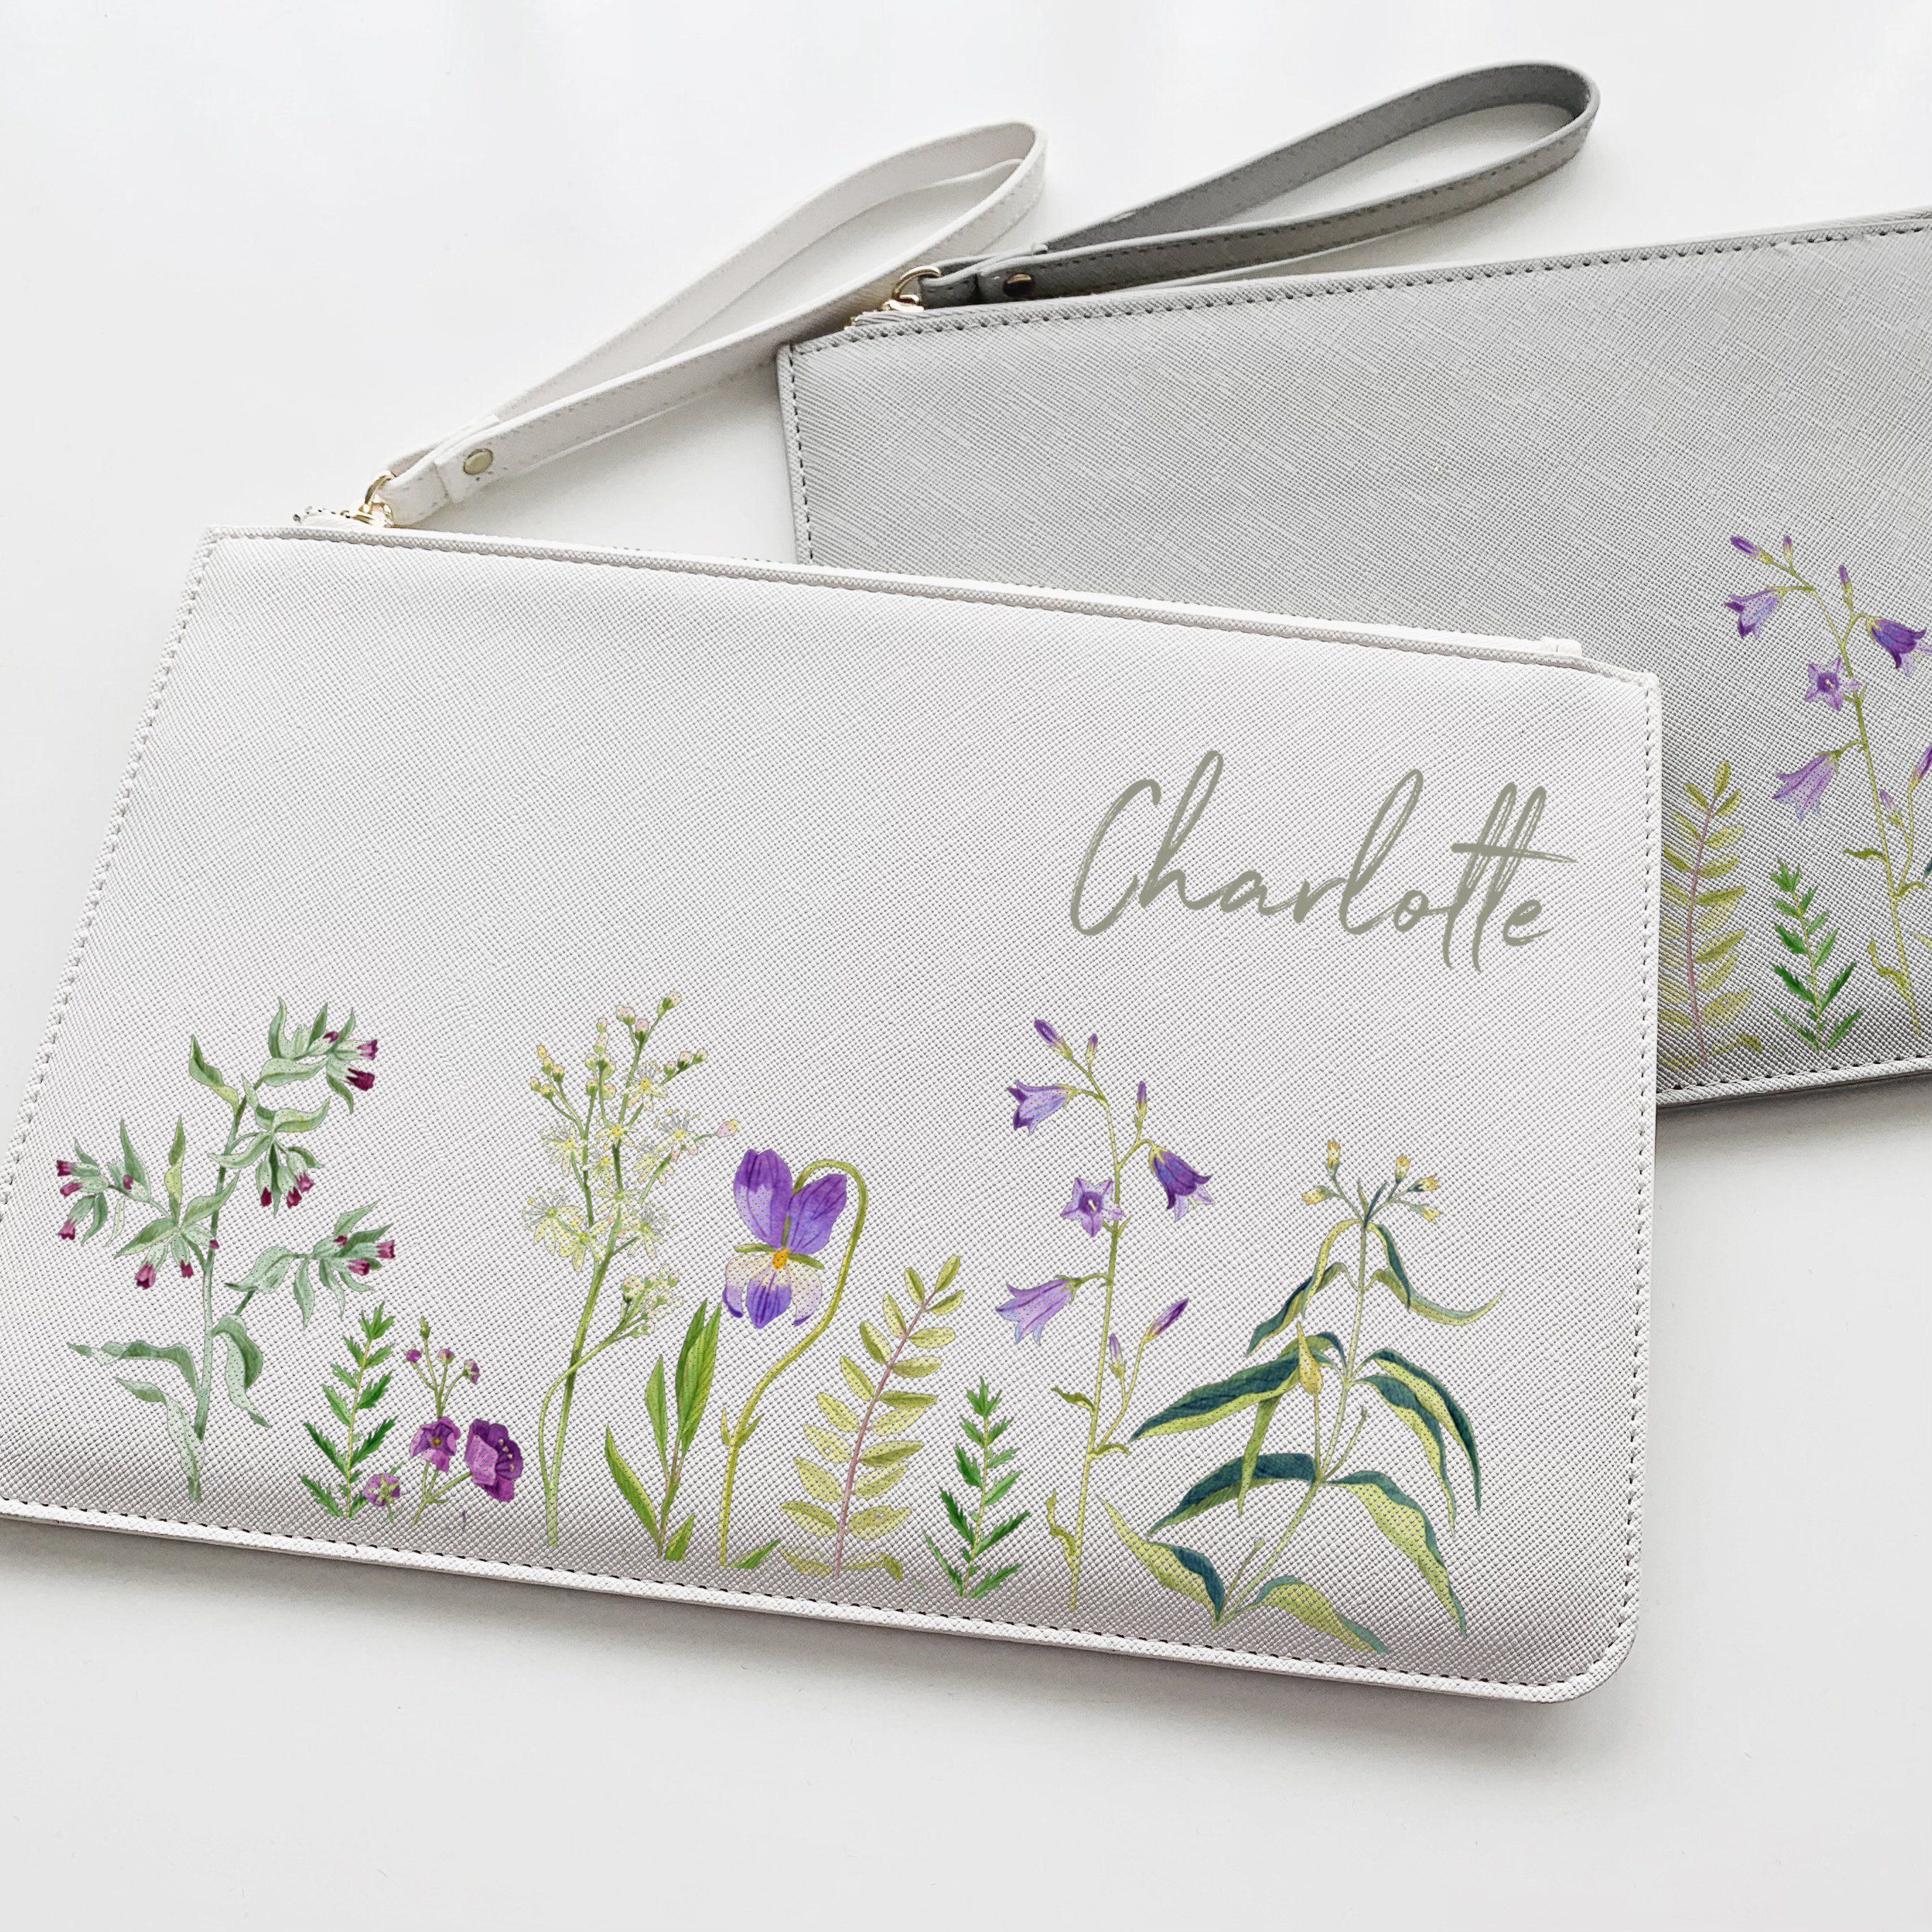 Personalised floral design clutch with name, friend, Bride, bridesmaid, maid of honour, Makeup bag